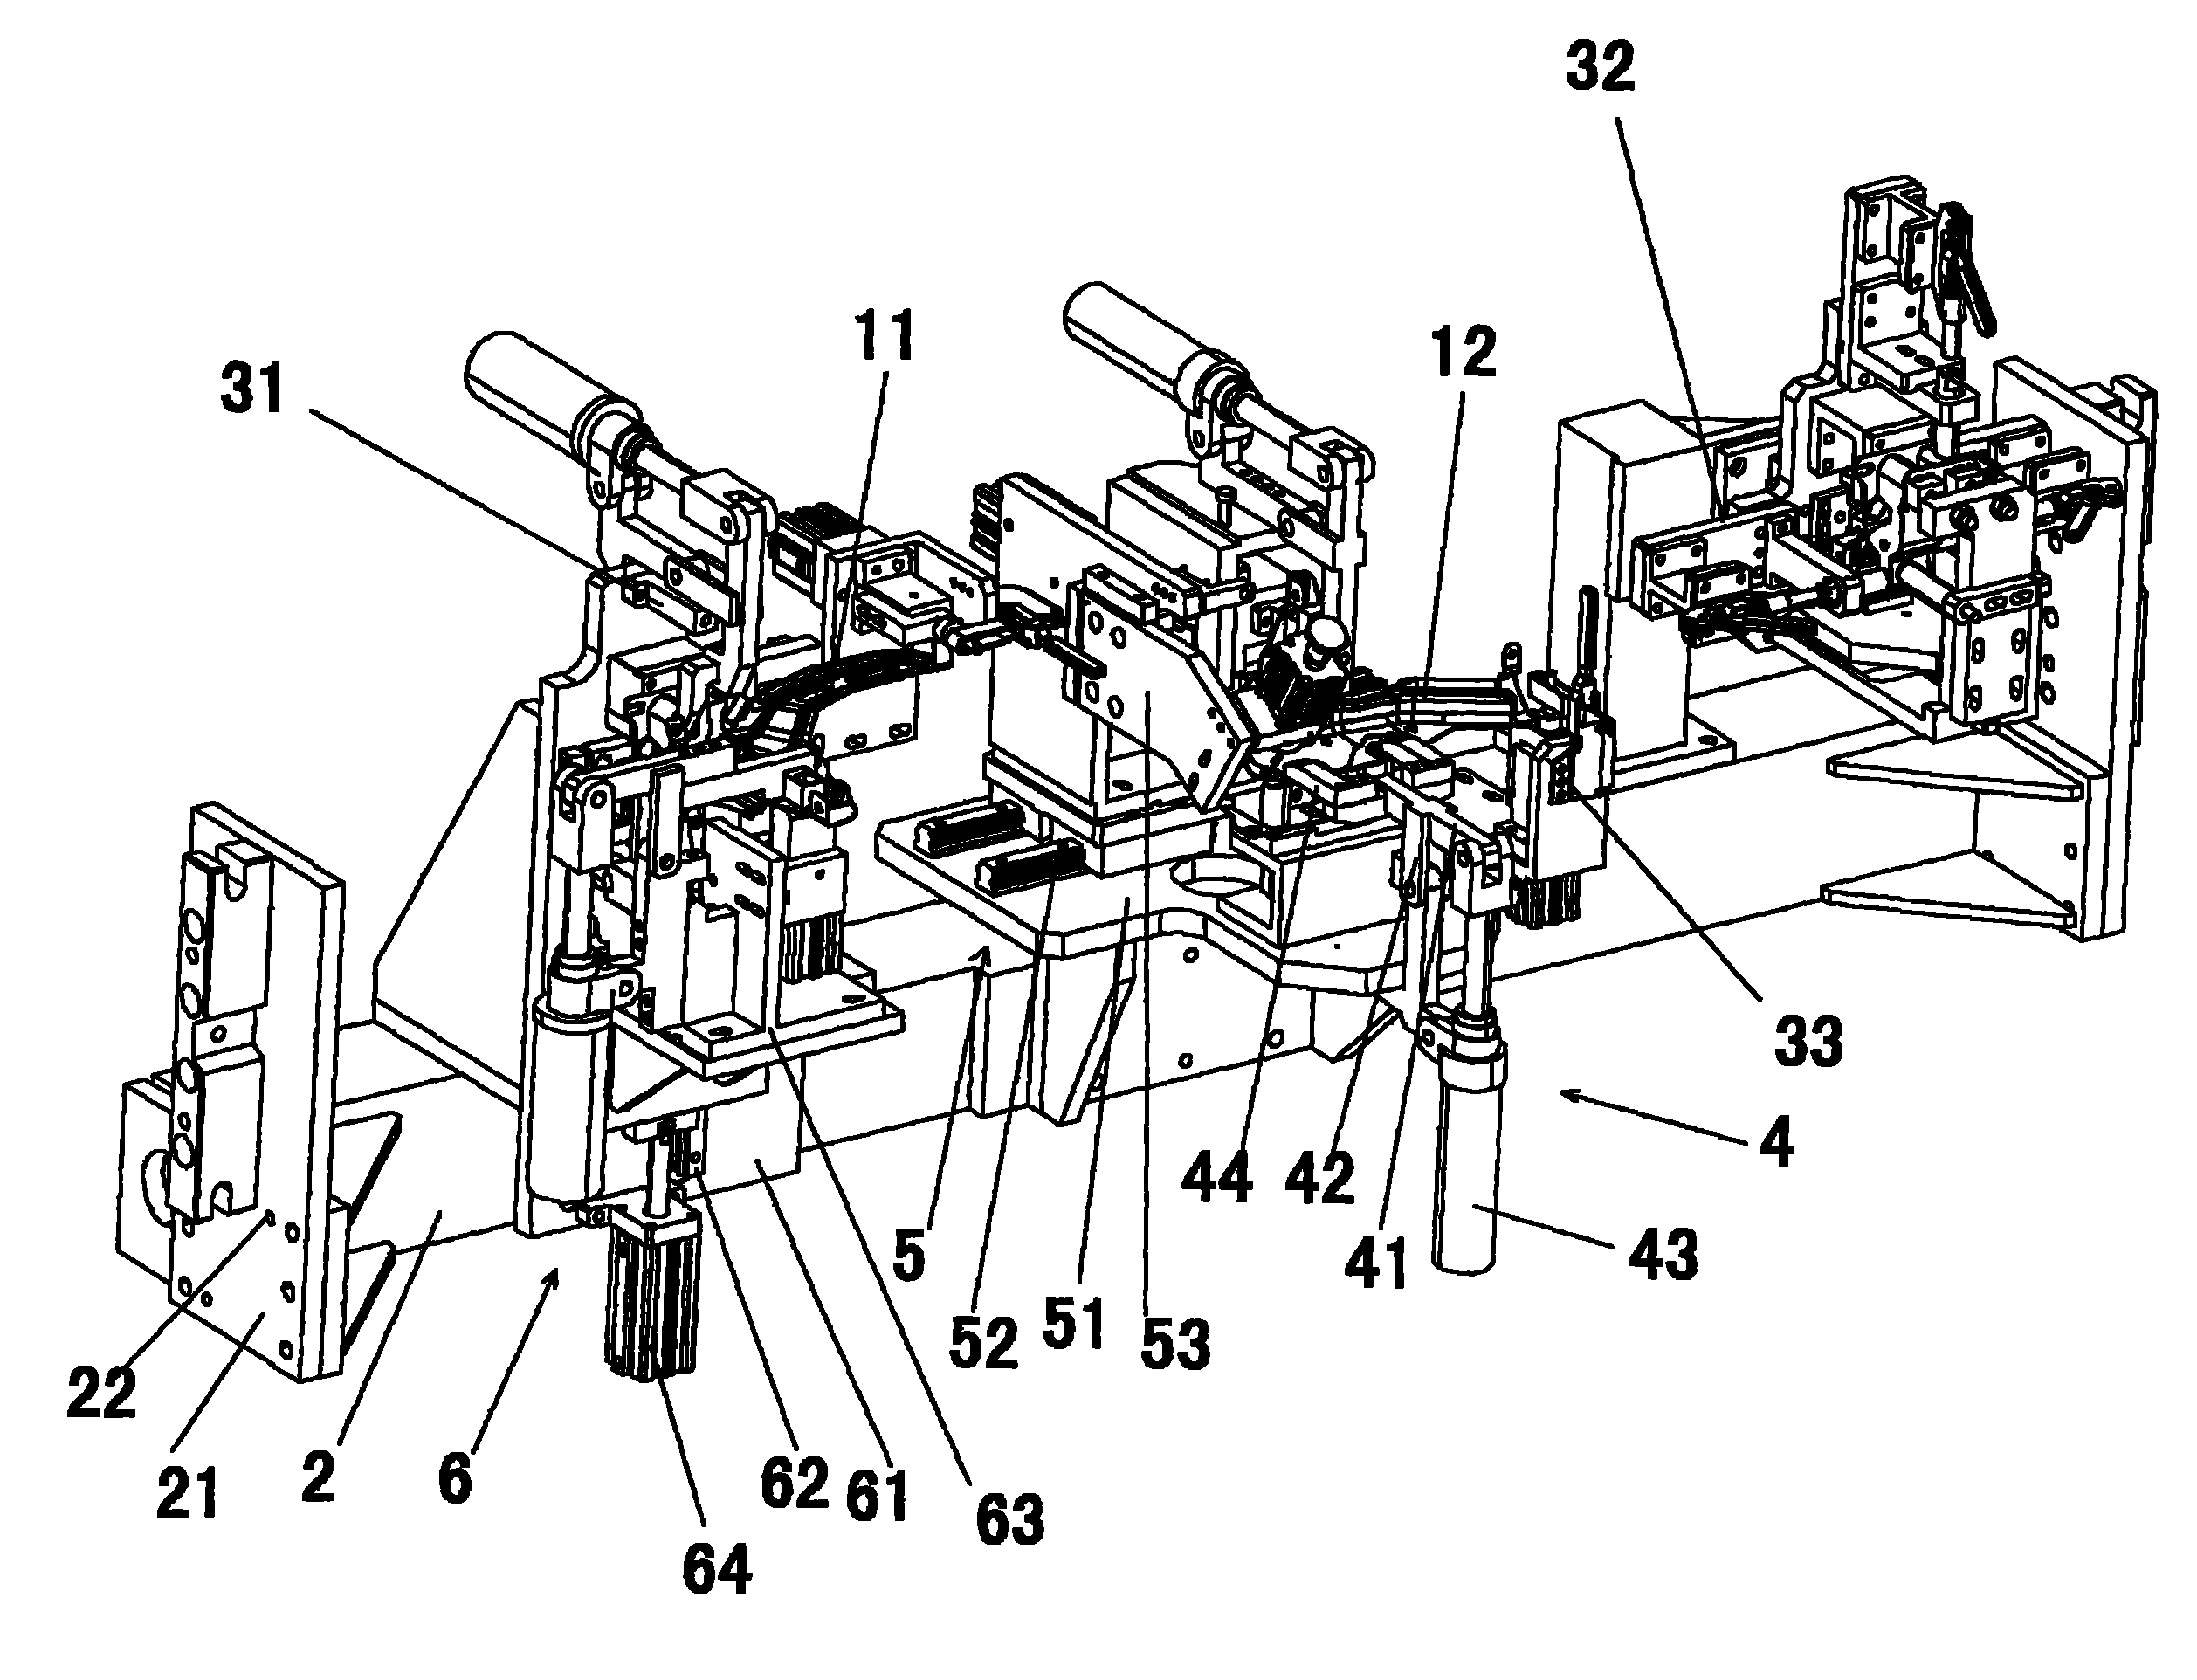 Fixture for manufacturing left and right supports of beam of automotive instrument